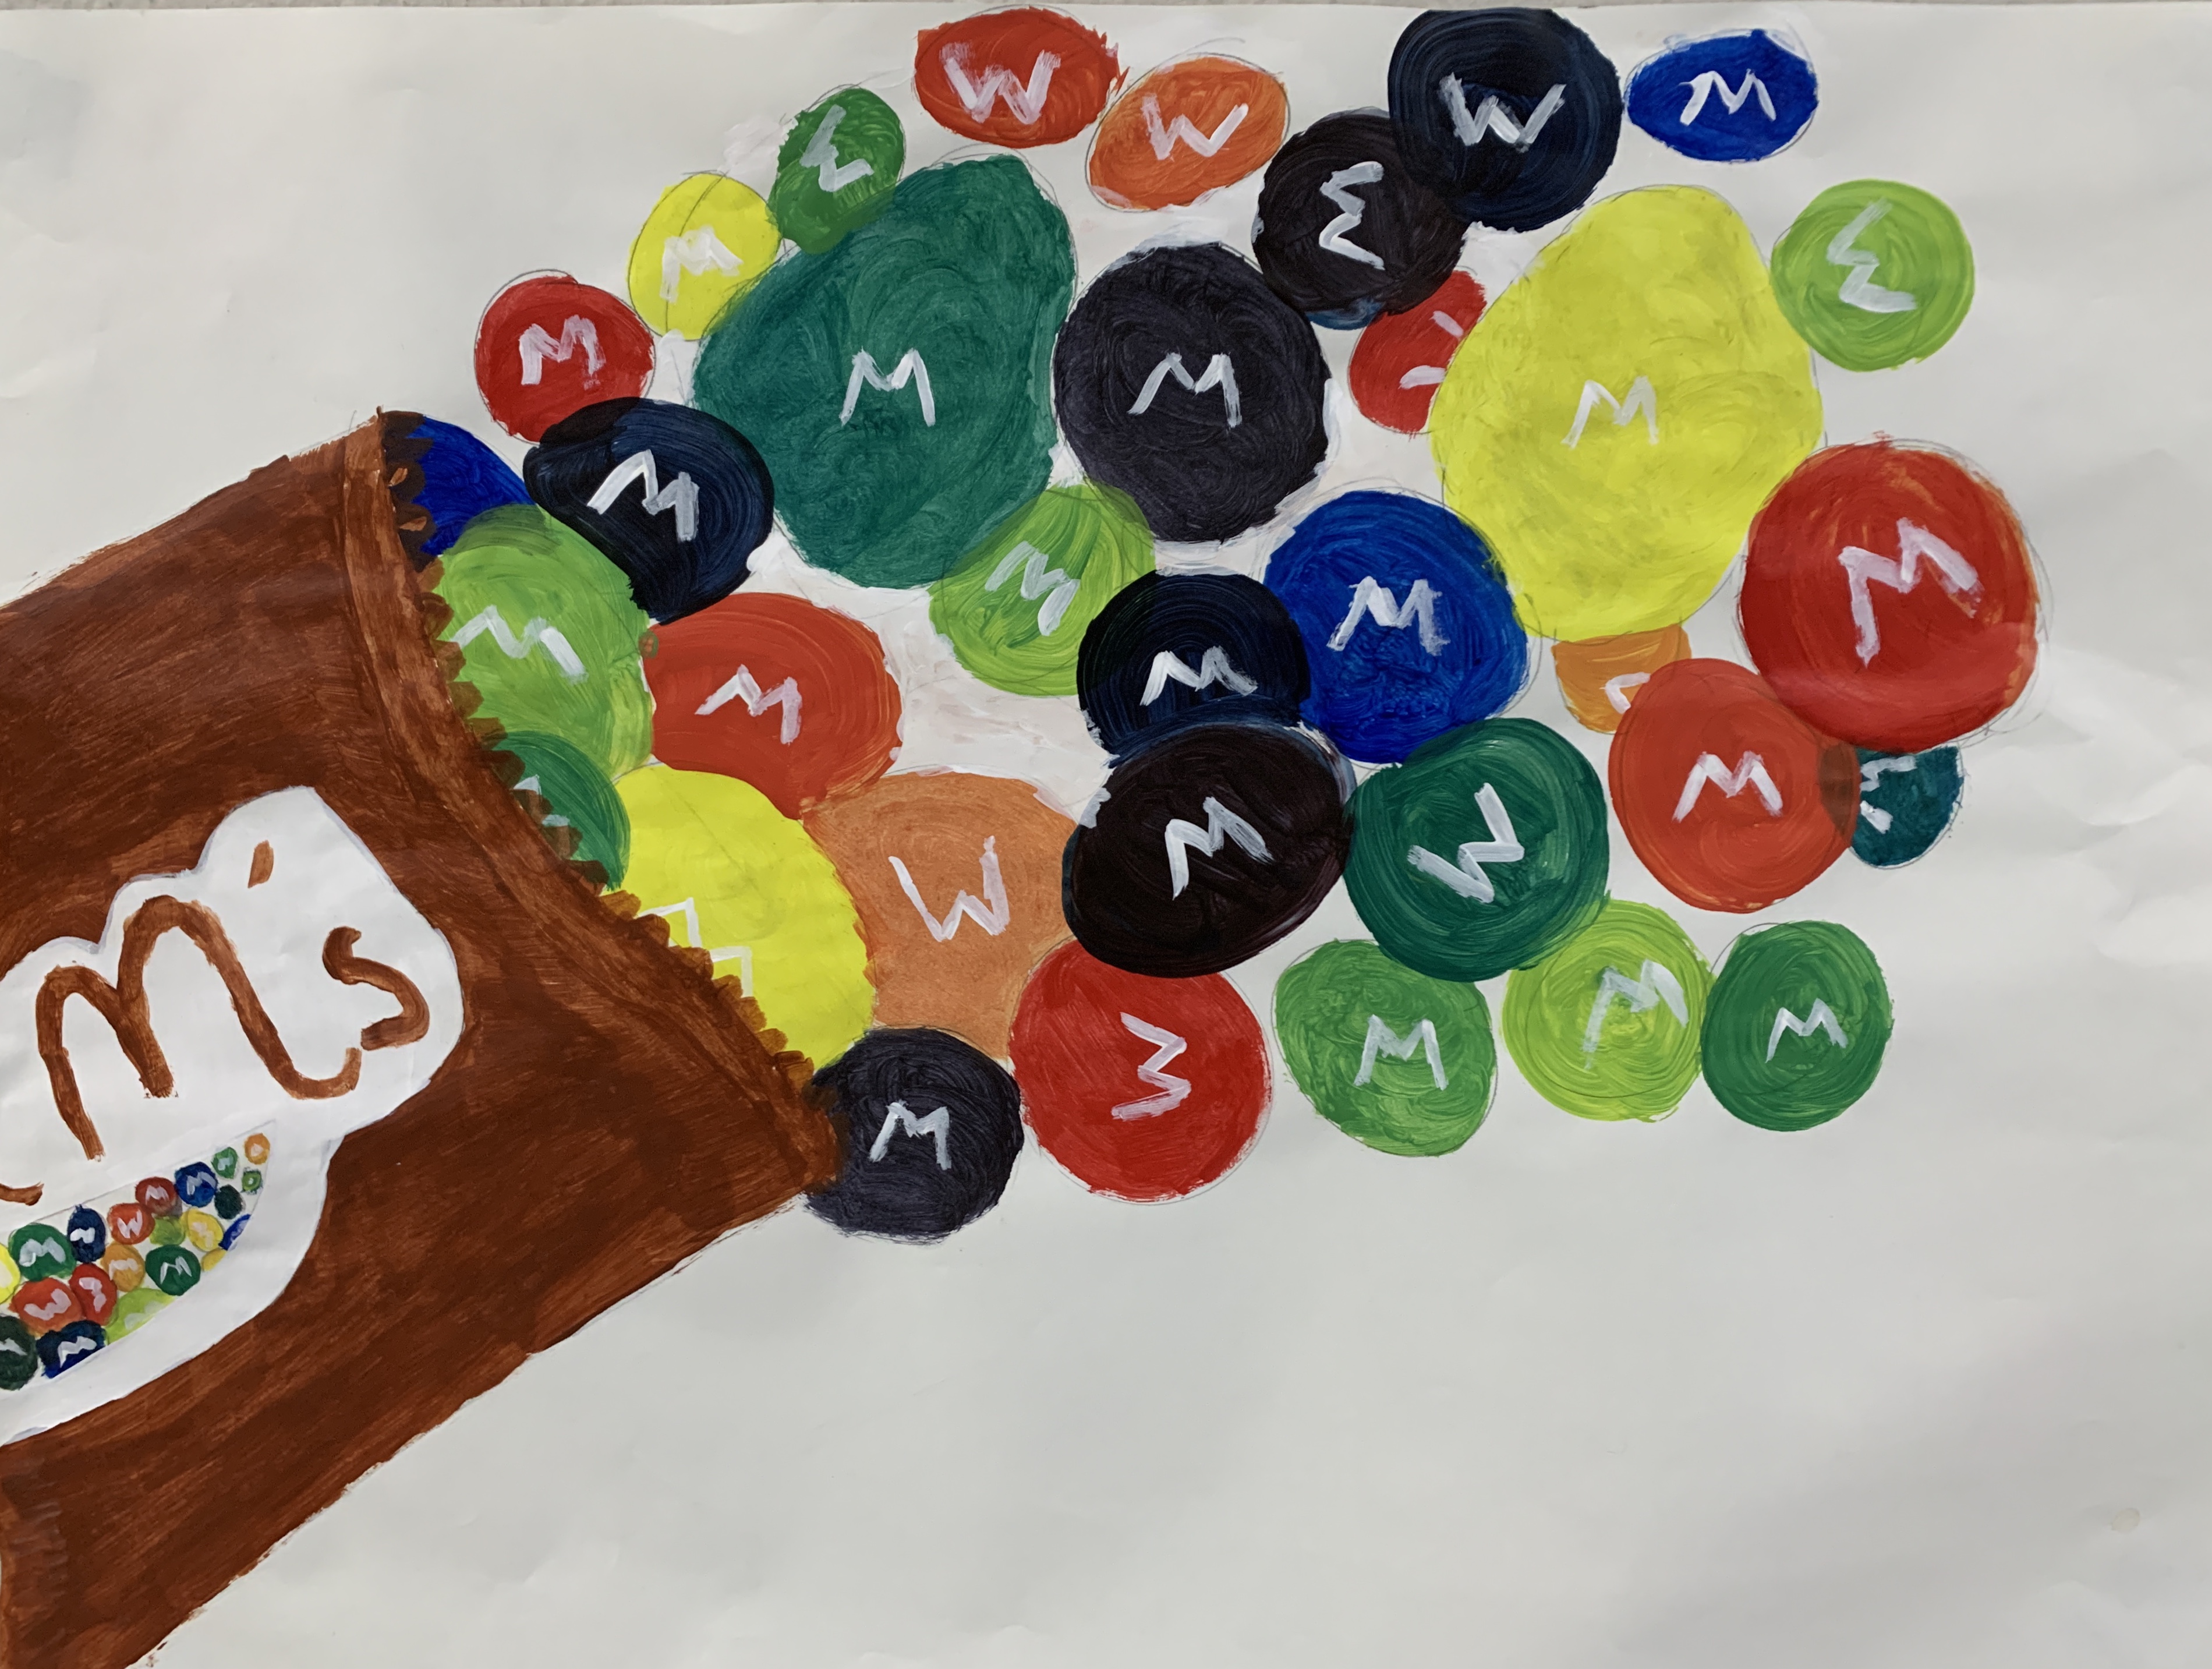 Students color wheel project - M&Ms